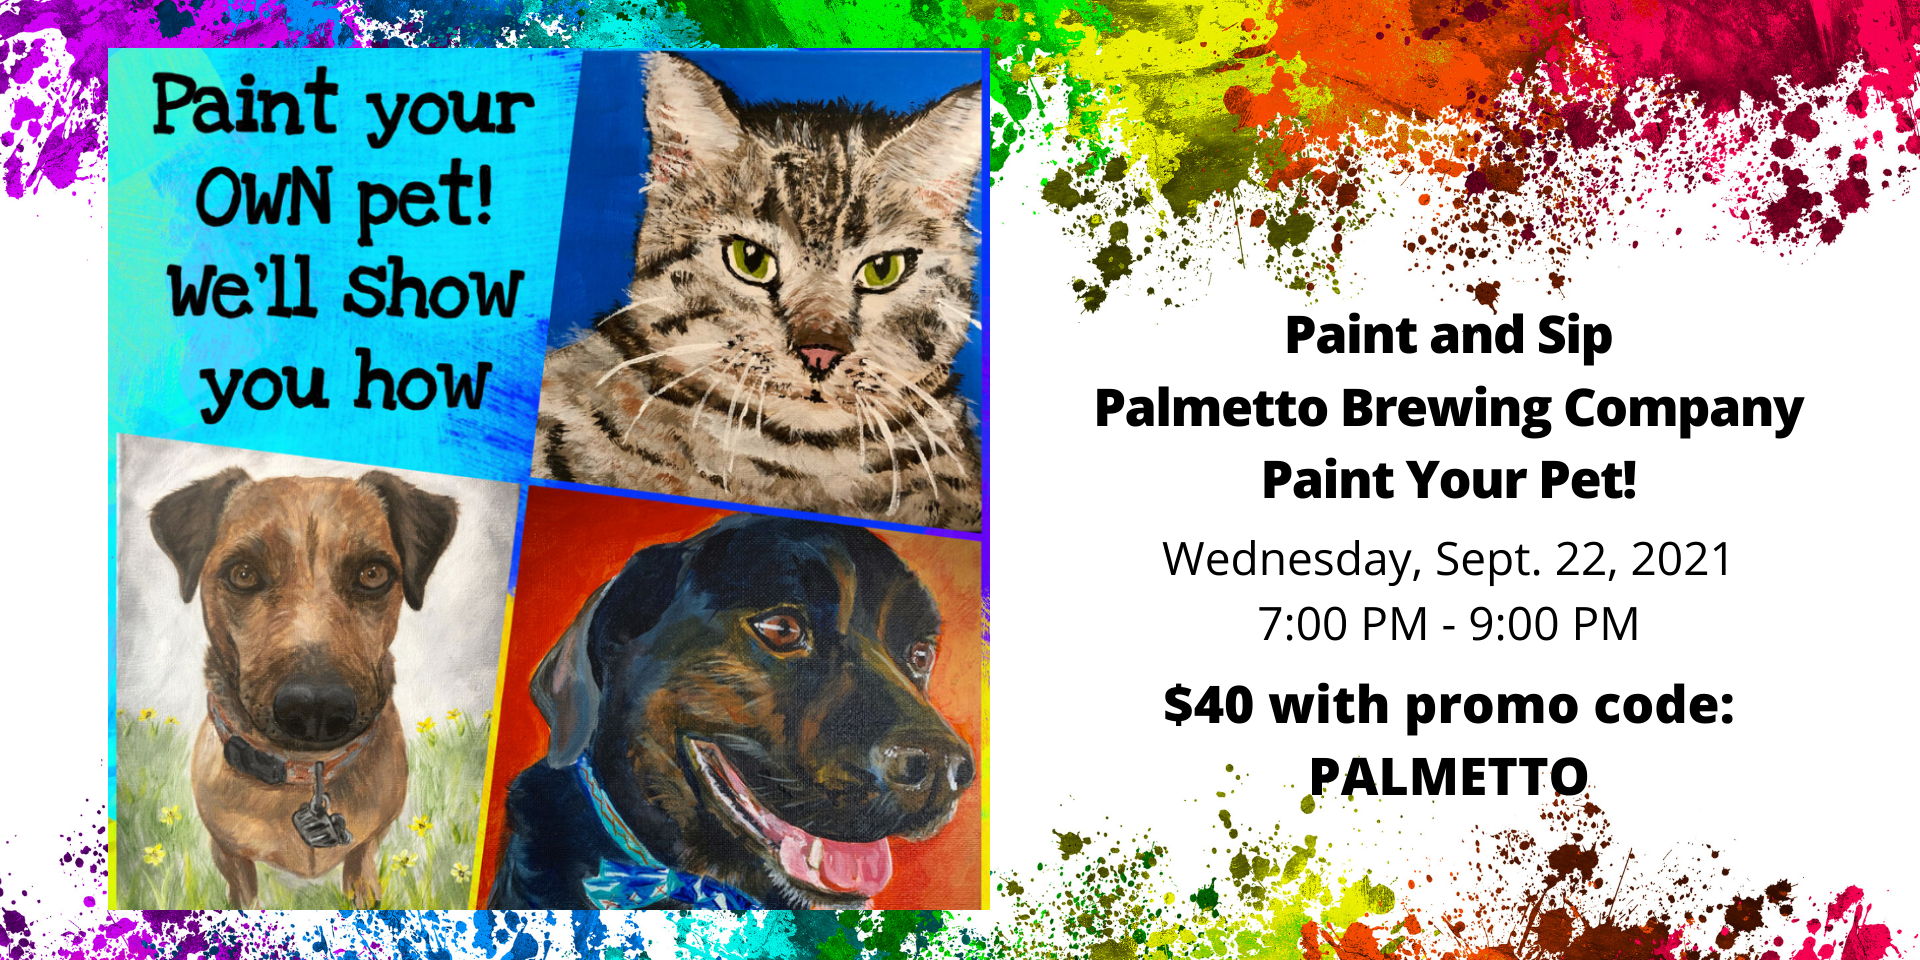 Paint and Sip @ Palmetto Brewing Co: Paint-Your-Pet Event ($45pp) promotional image